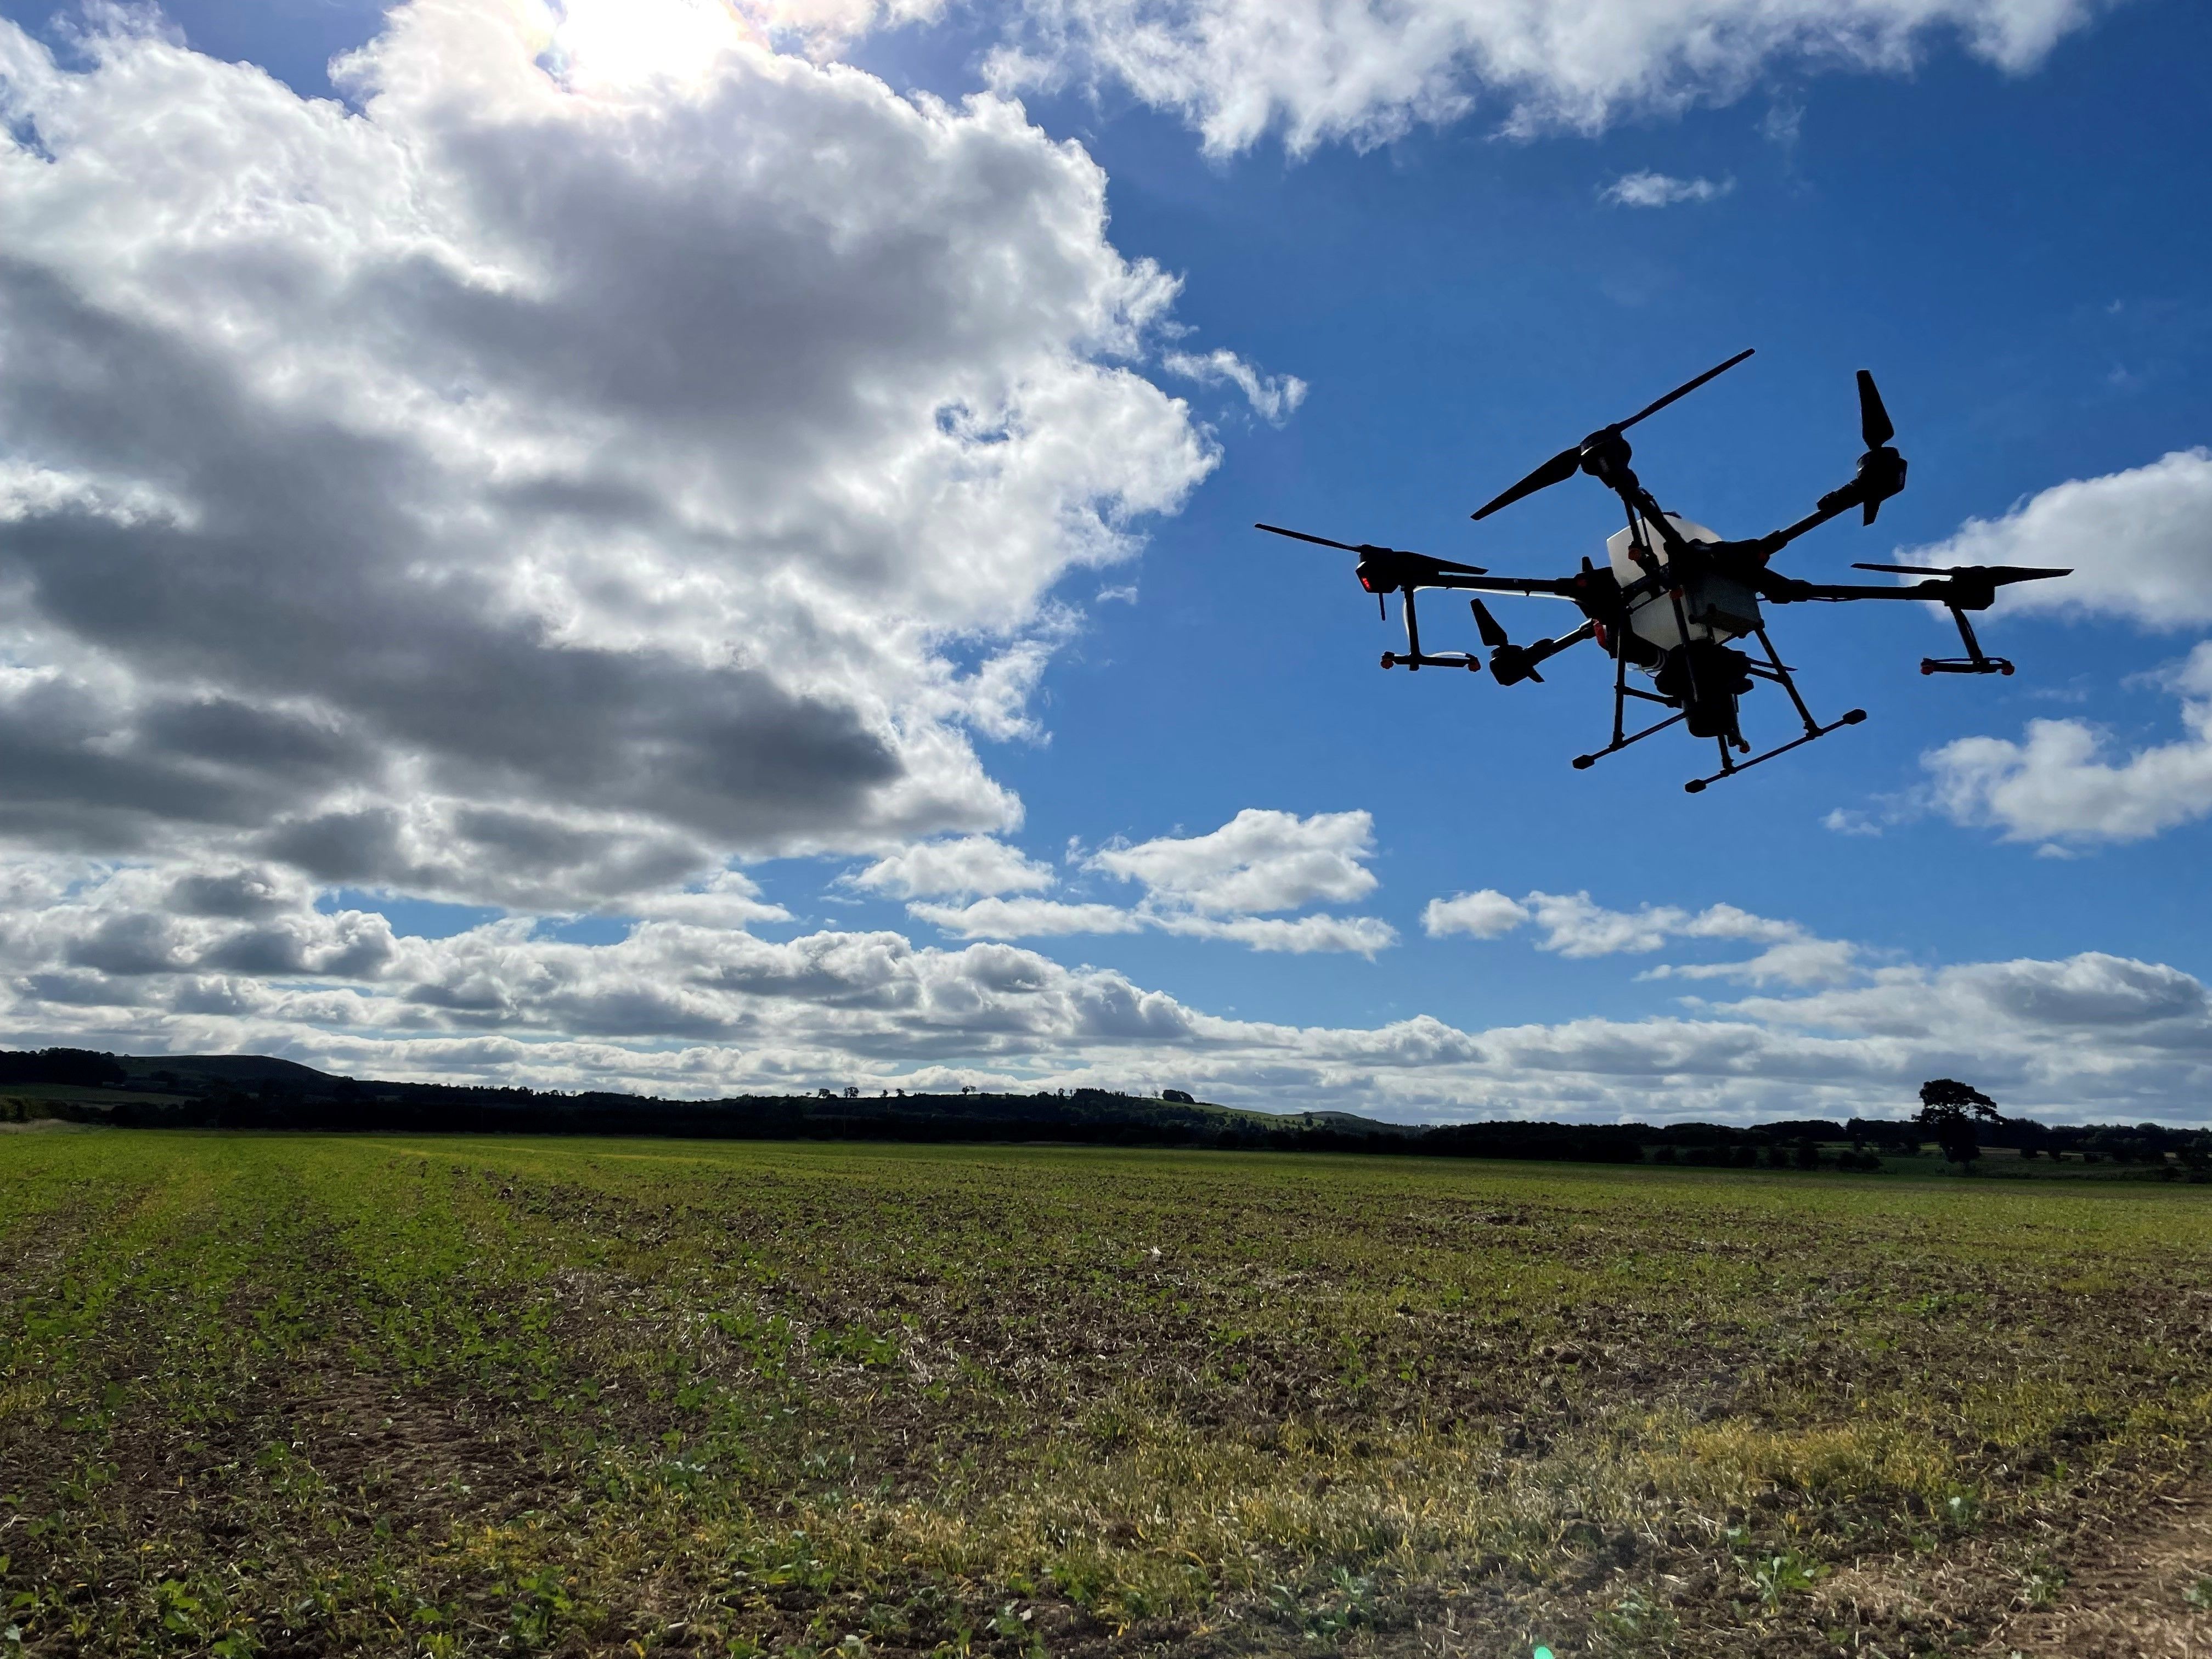 AgriTech Startup Drone Ag Completes £795,000 Round to Fund Growth